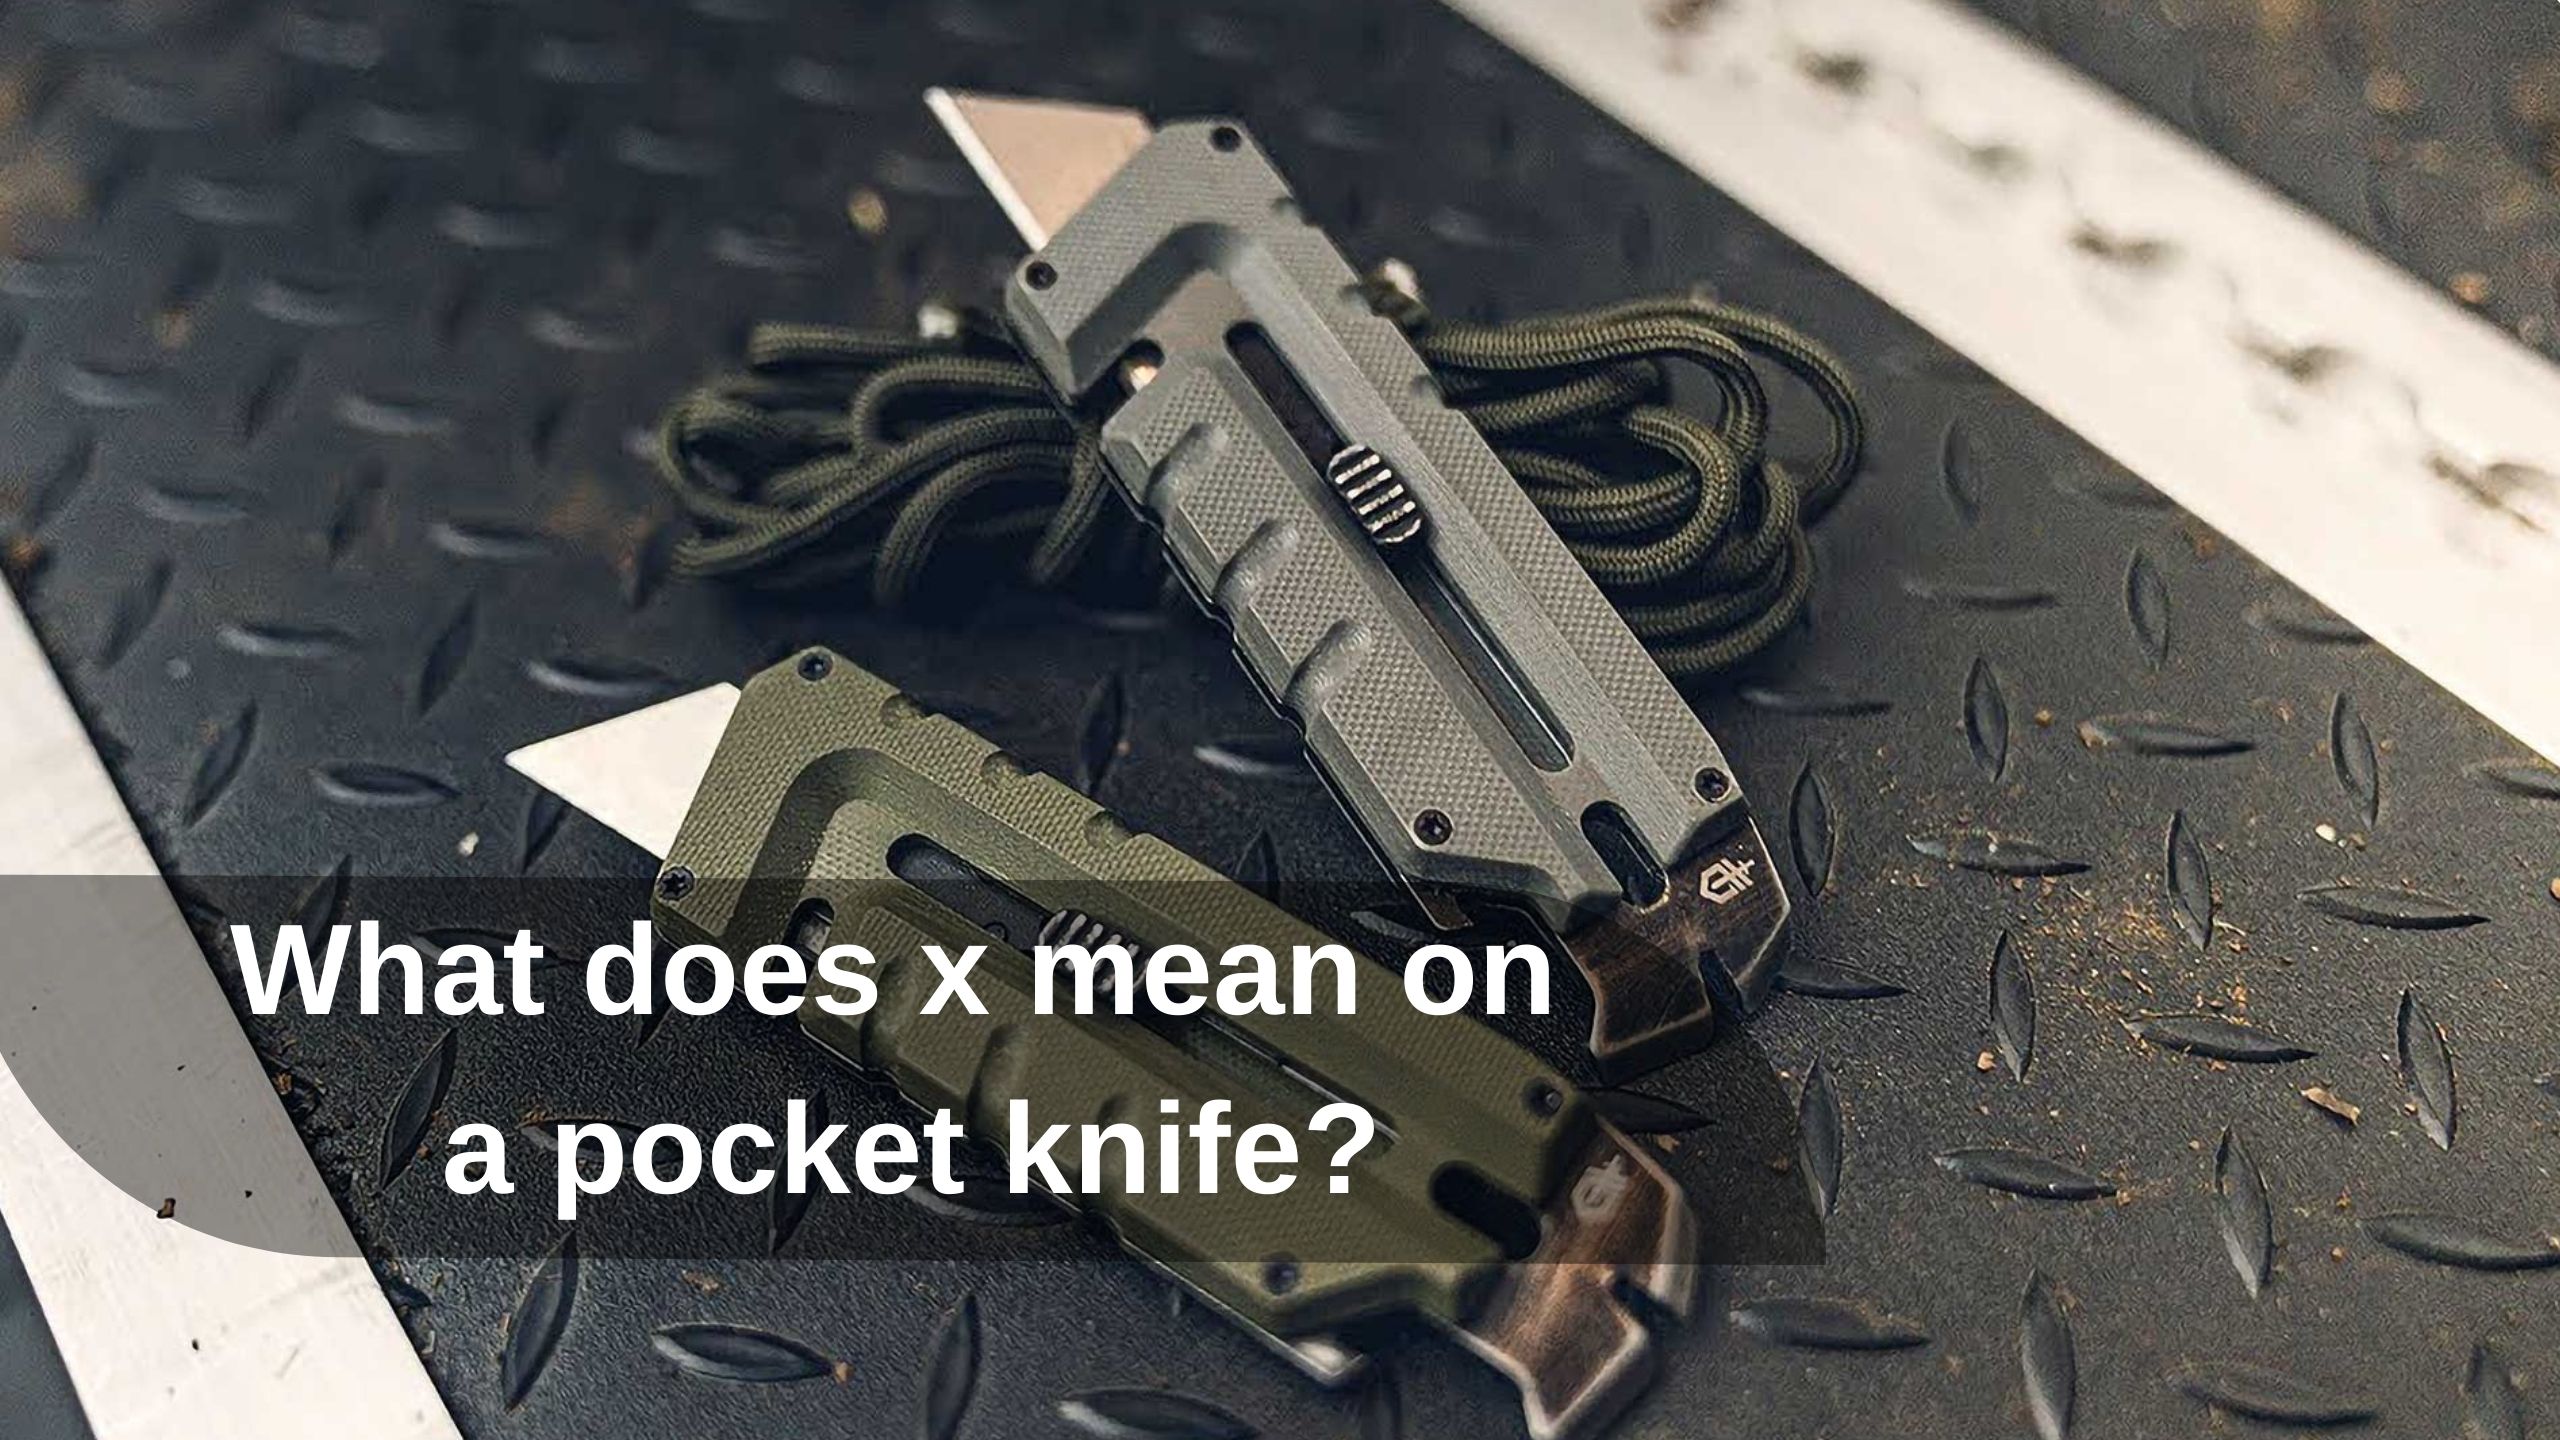 What does x mean on a pocket knife?